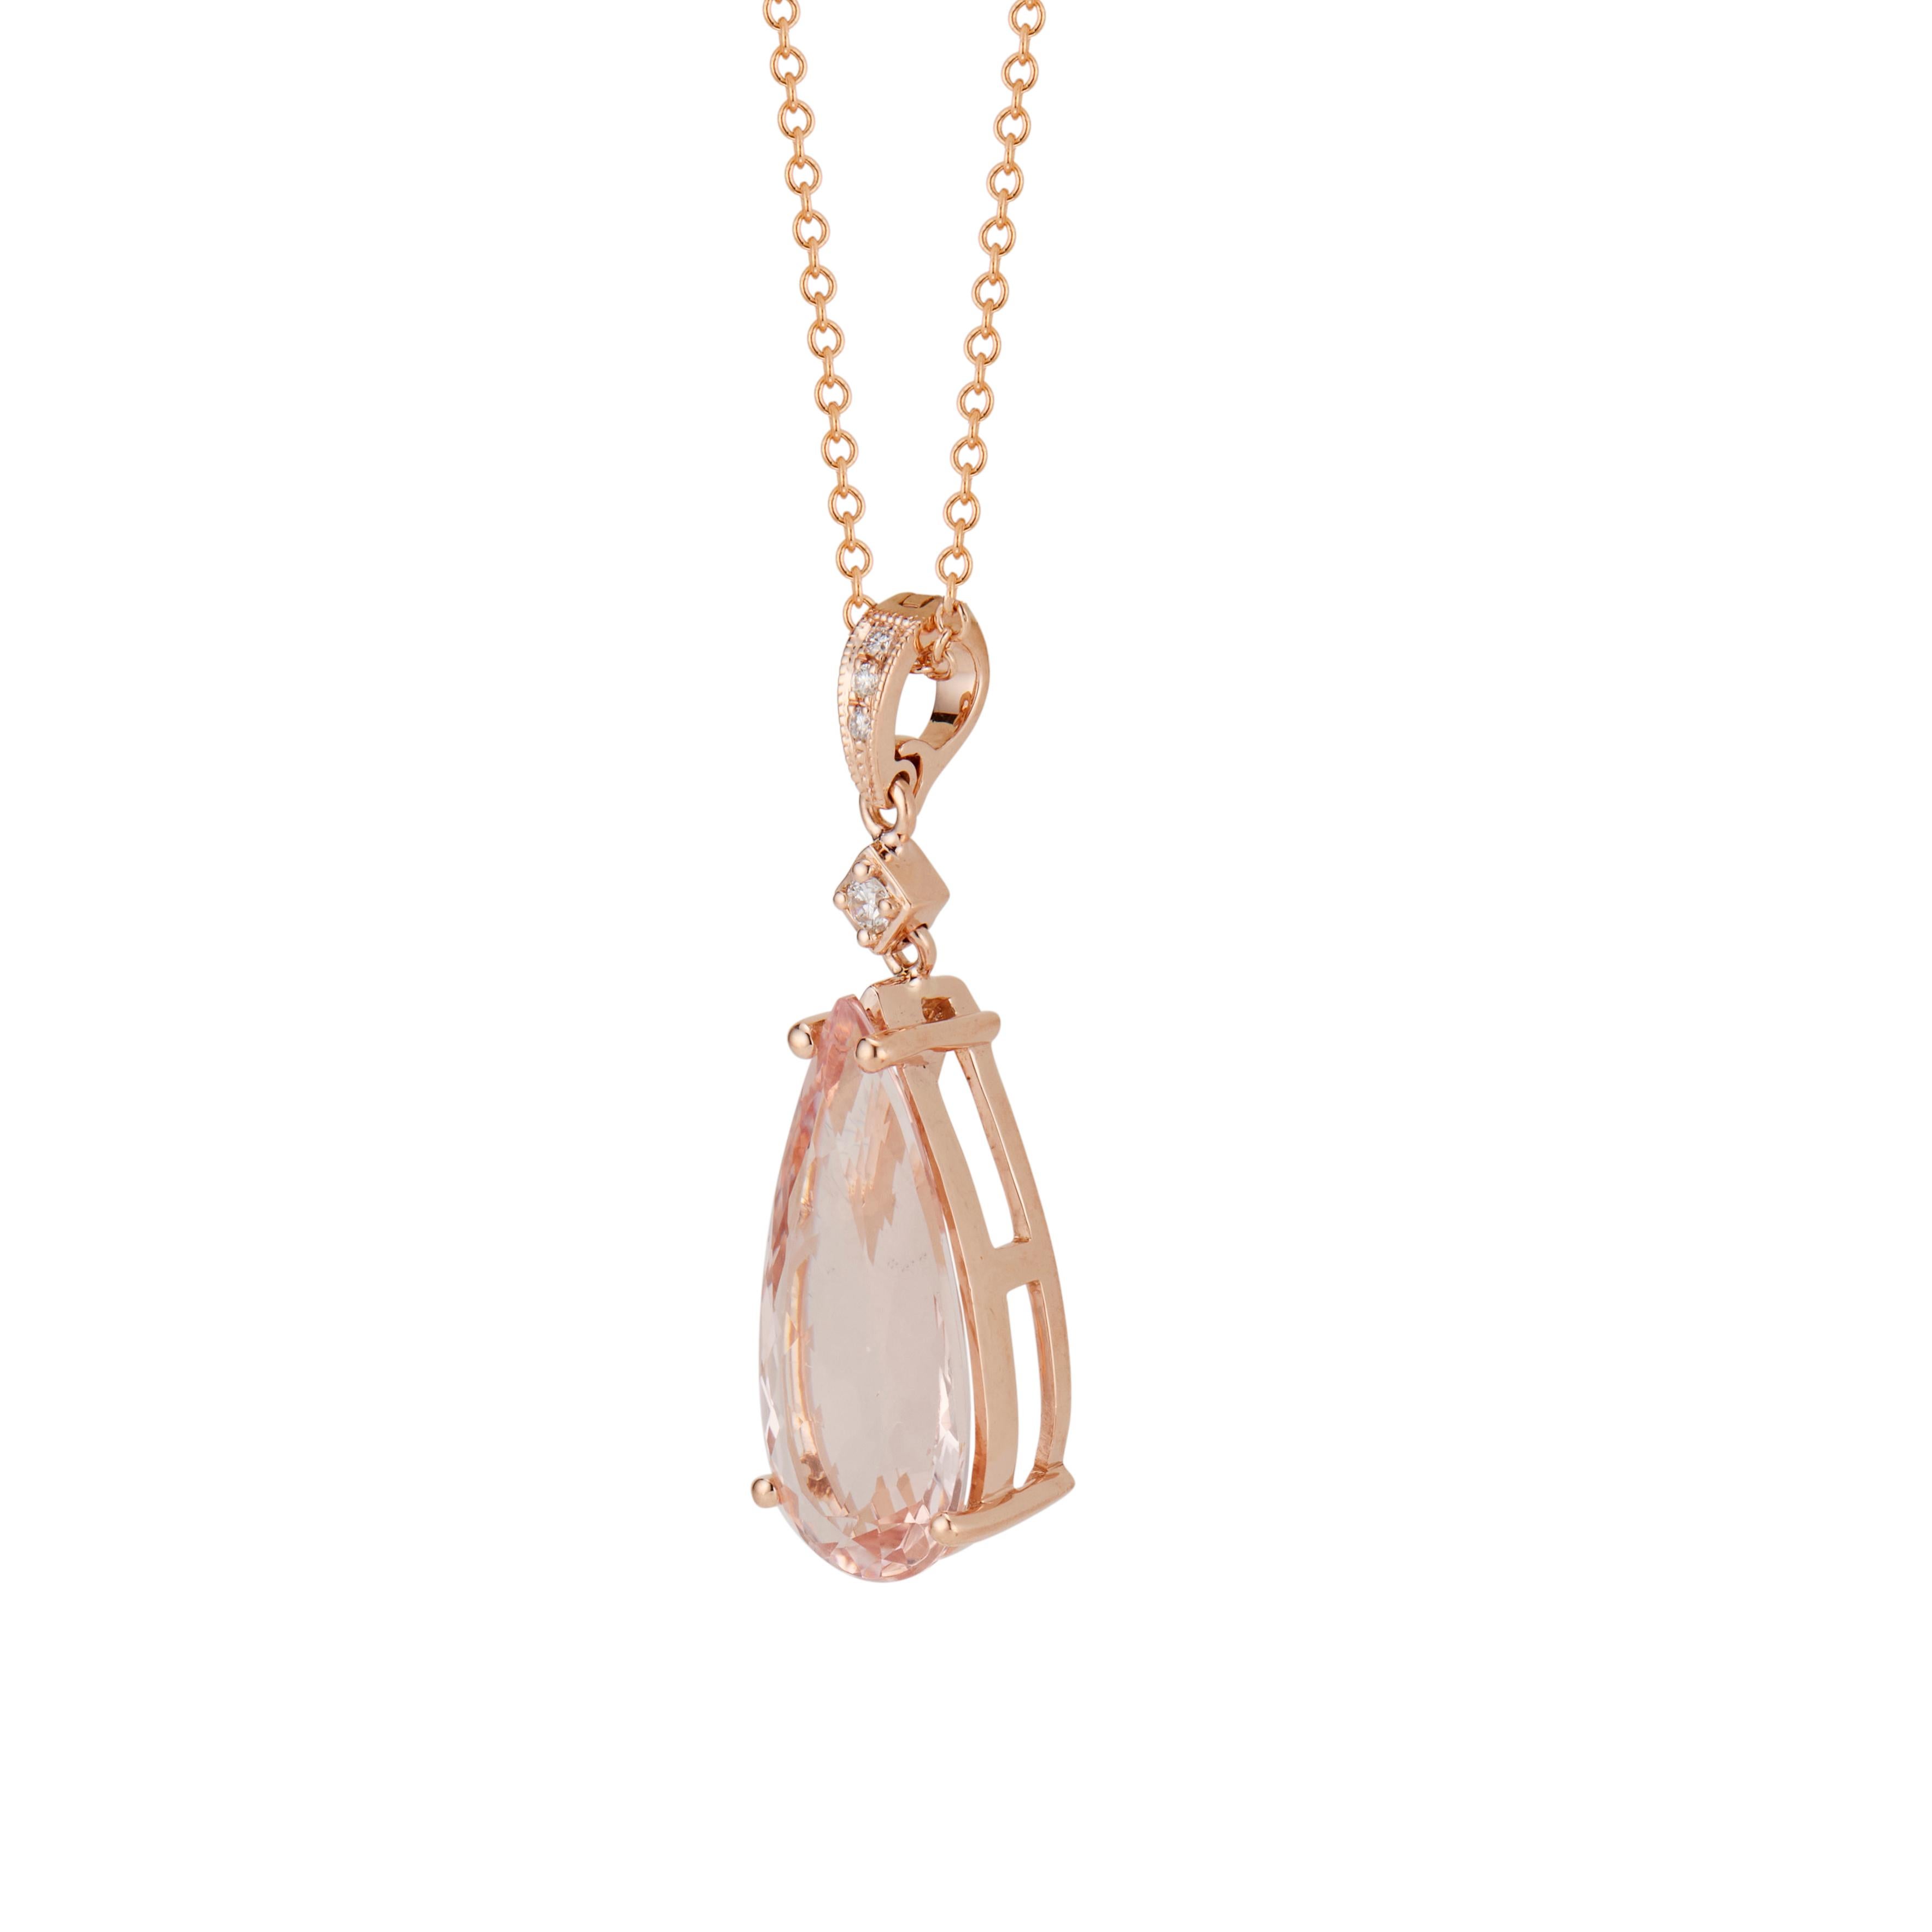 Morganite and diamond pendant necklace. Soft pink pear shape morganite with diamond accents in 14k rose gold. 17 inches in length. Designed and crafted in the Peter Suchy workshop

1 pear shape pink morganite, approx. 4.38cts
1 round brilliant cut